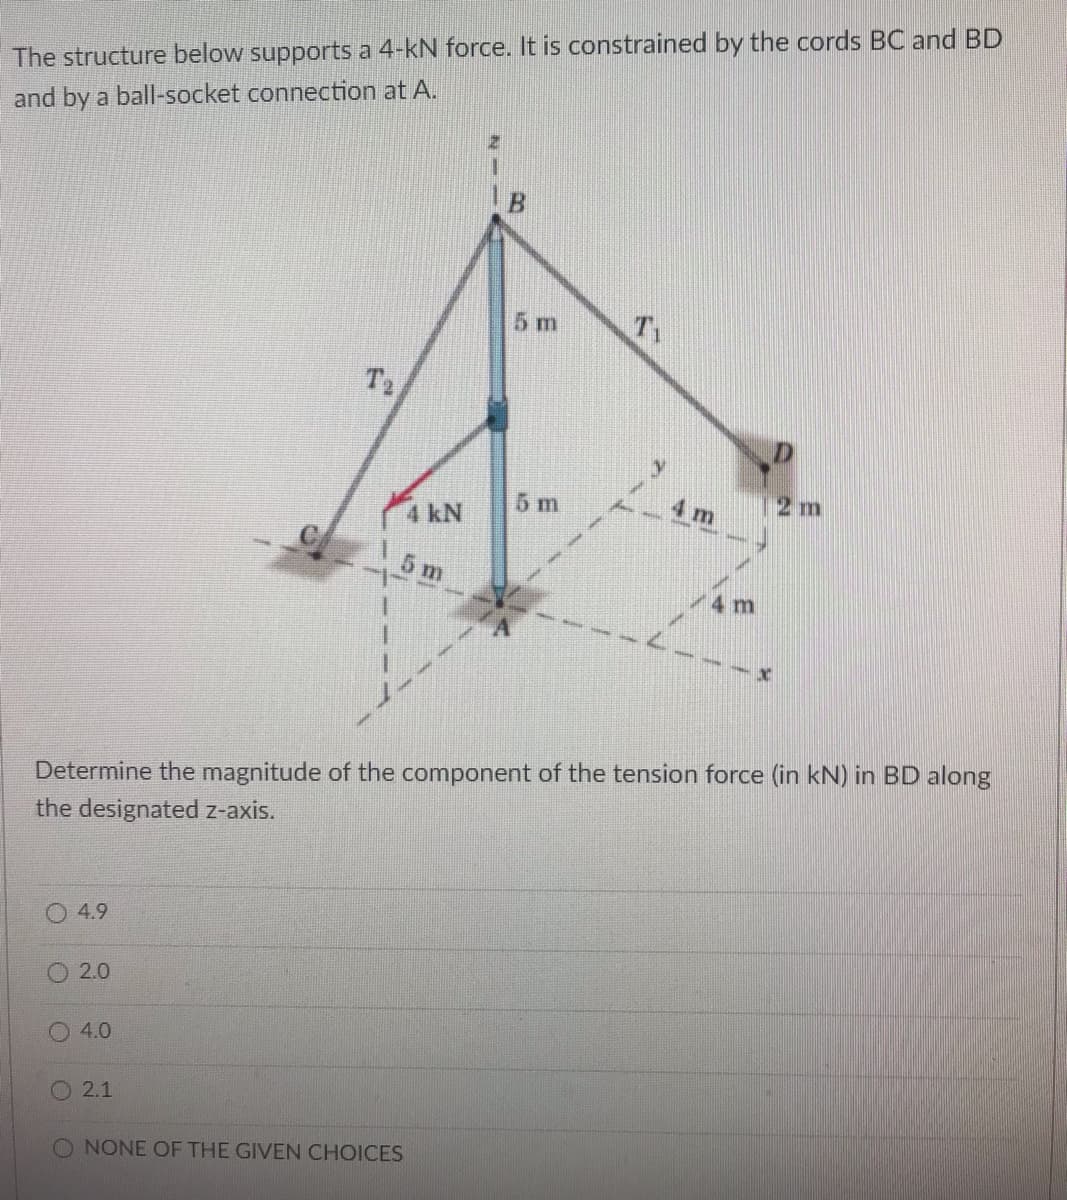 The structure below supports a 4-kN force. It is constrained by the cords BC and BD
and by a ball-socket connection at A.
5 m
T2
5 m
4 m
2 m
4 kN
5 m
4 m
Determine the magnitude of the component of the tension force (in kN) in BD along
the designated z-axis.
4.9
2.0
4.0
O 2.1
O NONE OF THE GIVEN CHOICES
